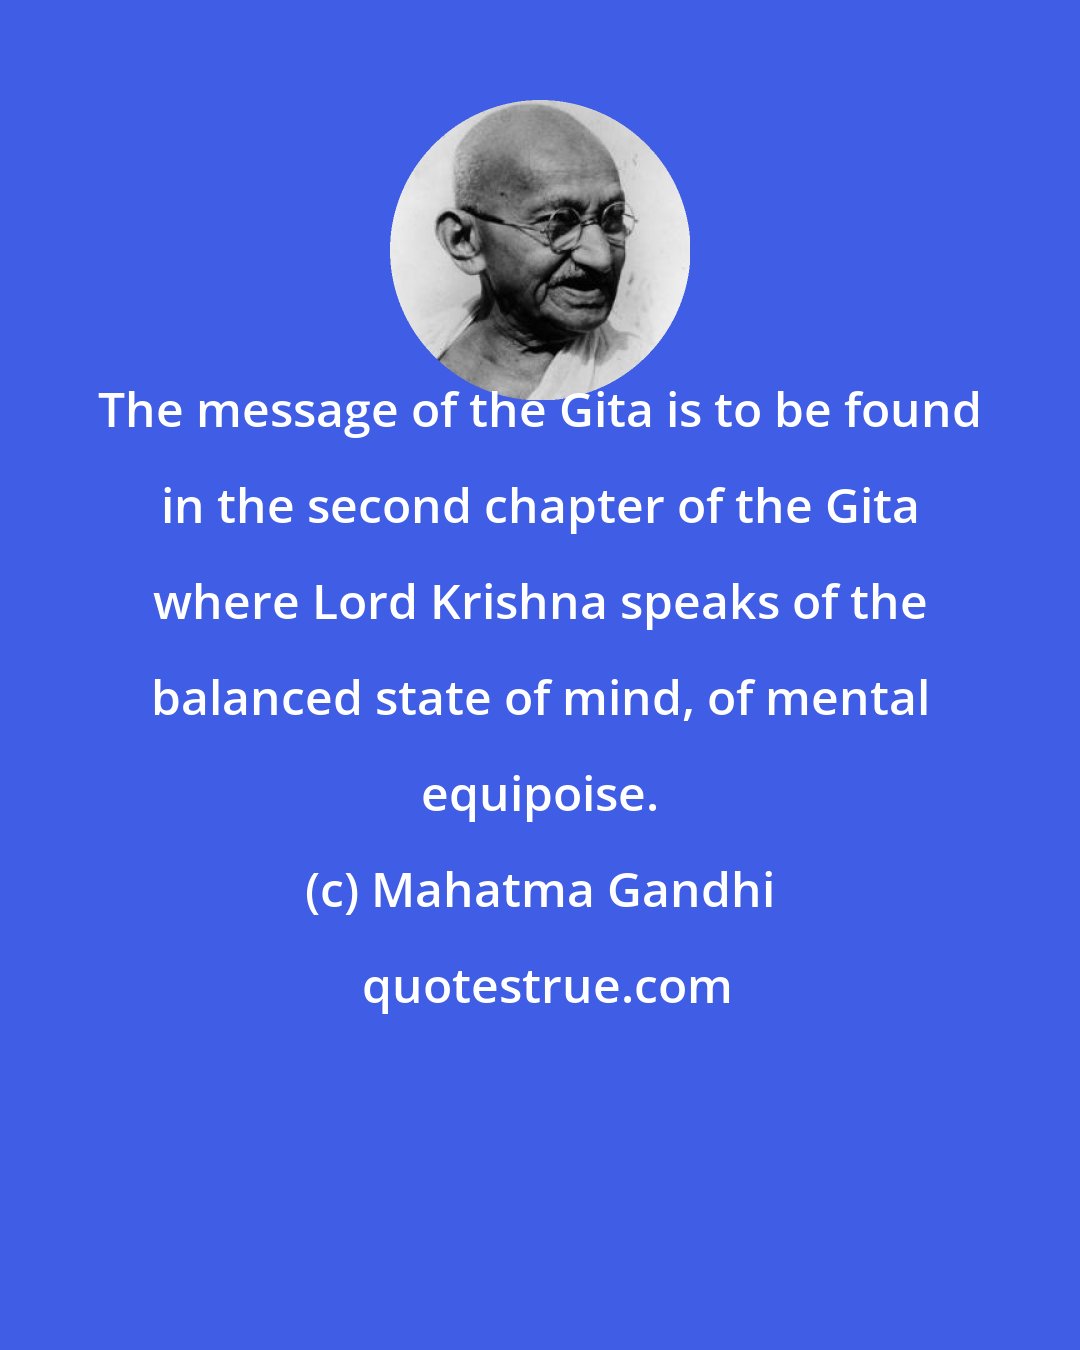 Mahatma Gandhi: The message of the Gita is to be found in the second chapter of the Gita where Lord Krishna speaks of the balanced state of mind, of mental equipoise.